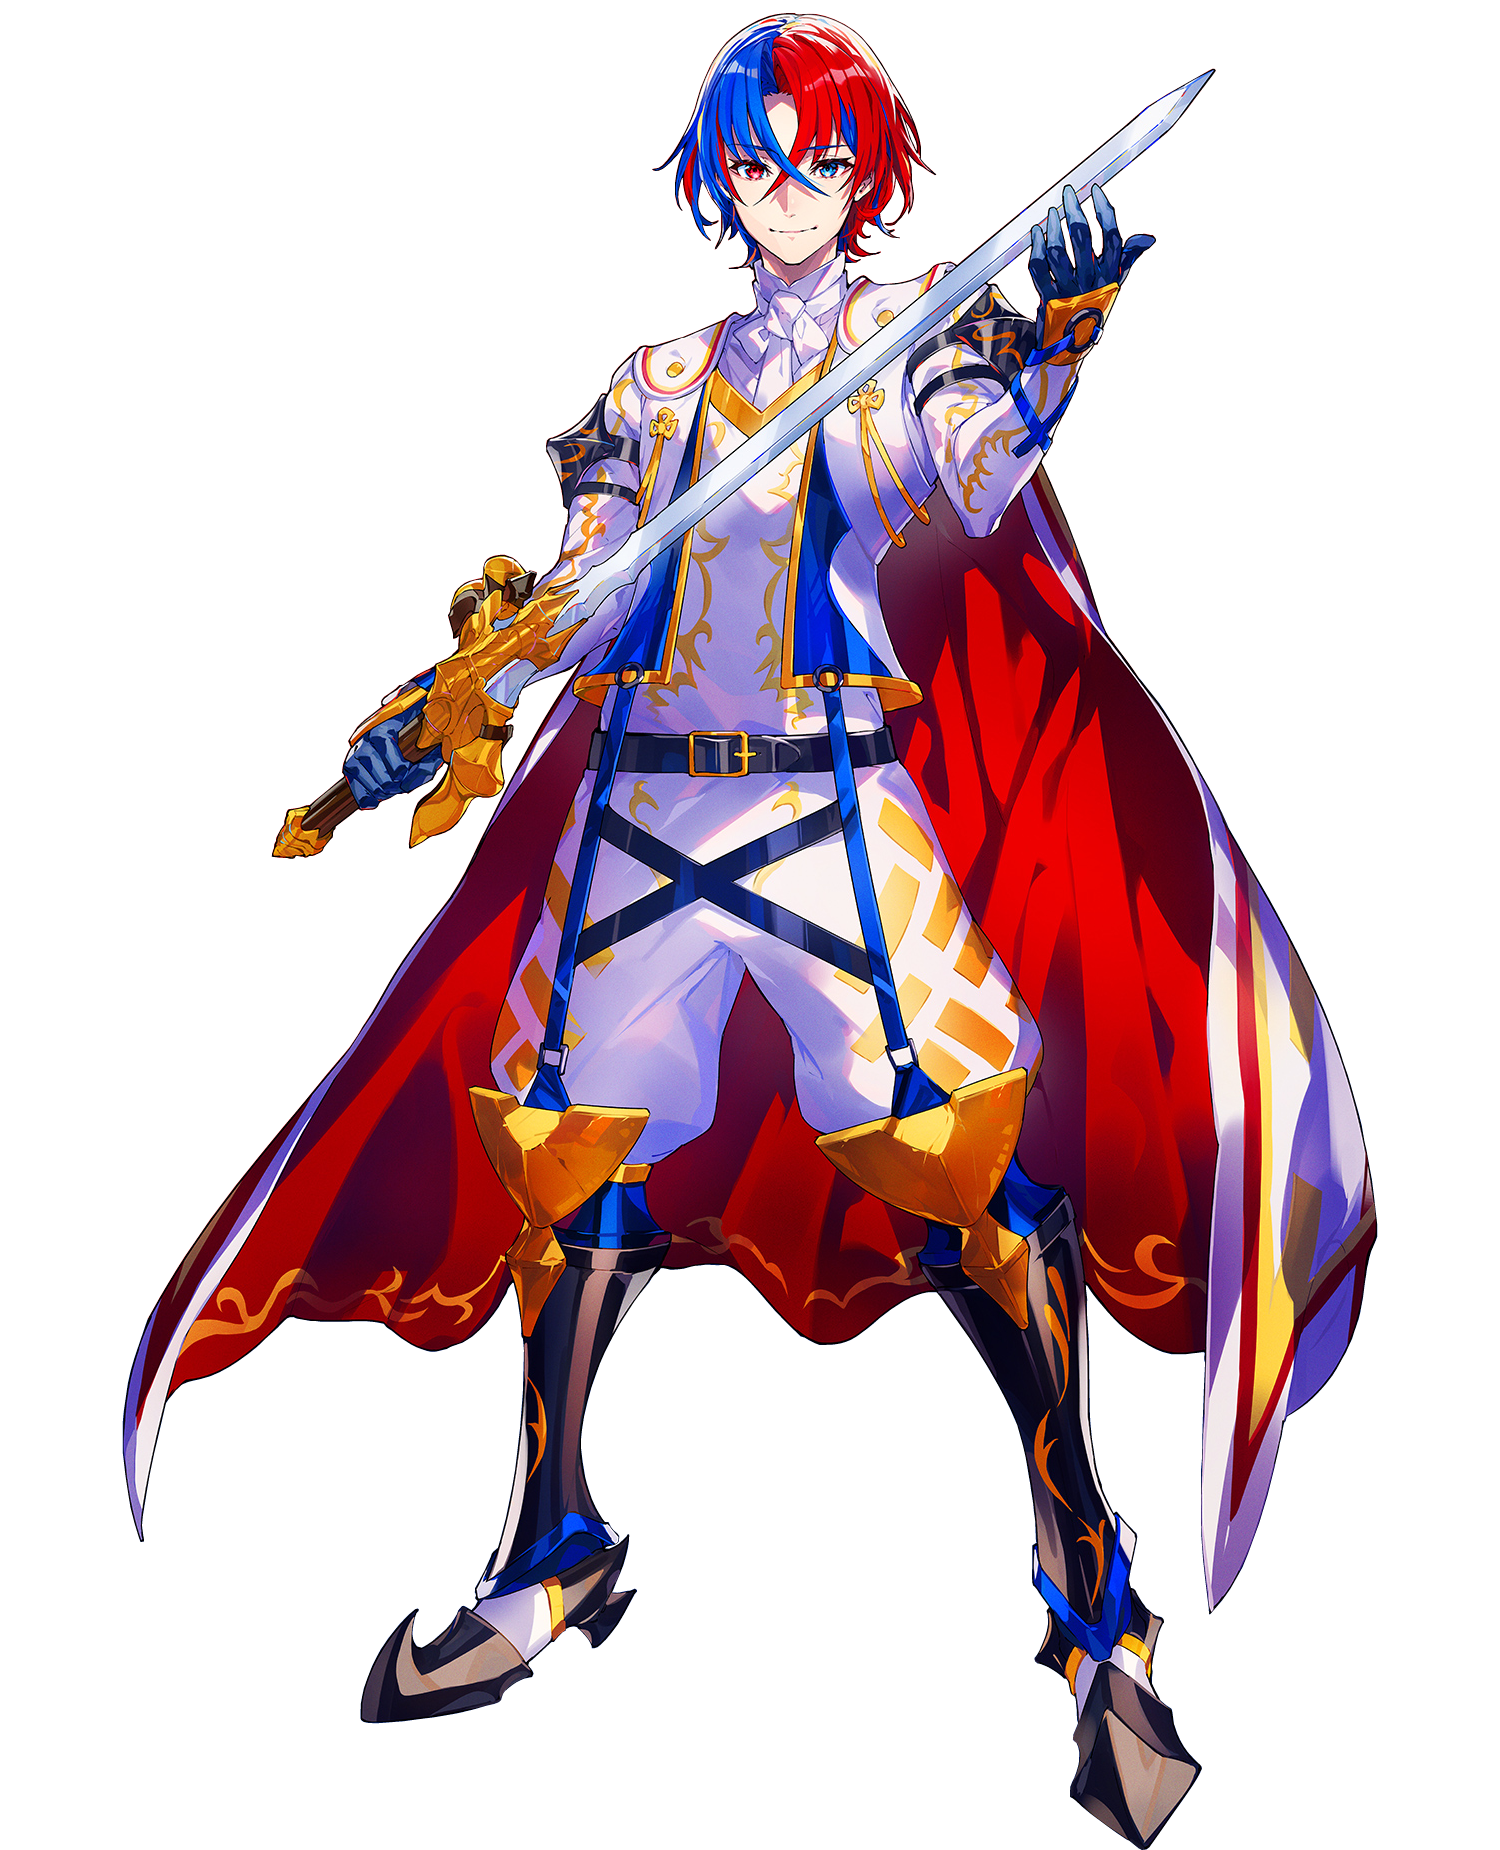 __alear_and_alear_fire_emblem_and_1_more_drawn_by_mika_pikazo__c7a724b7e36e6c78c11aa4dab959262d.png